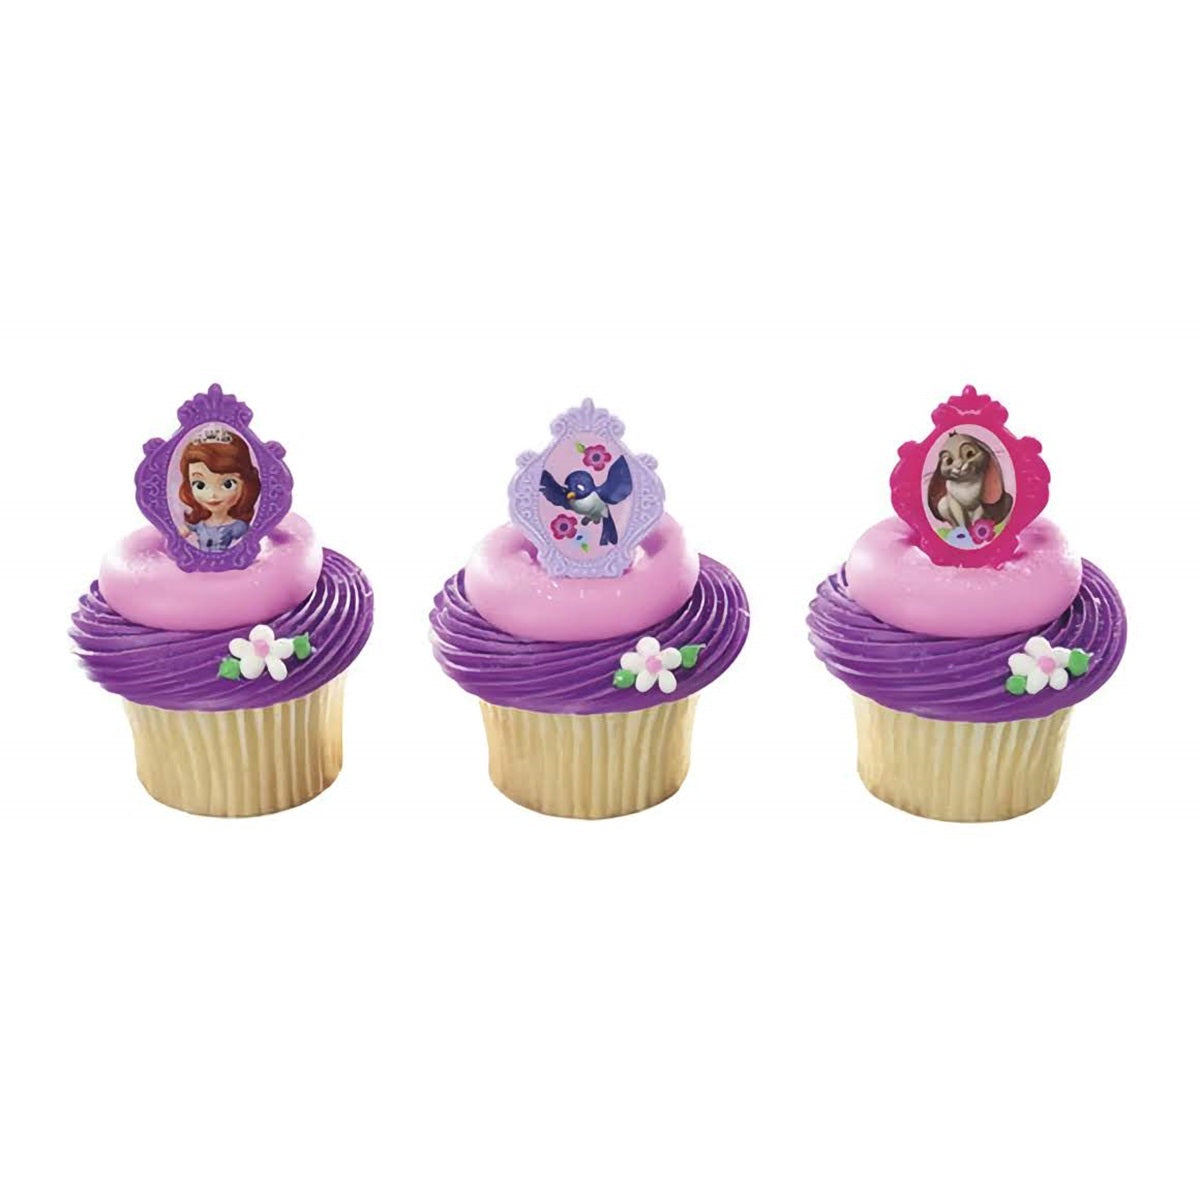 A set of cupcakes topped with 'Sofia the First' character rings, displaying Sofia, Clover, and Whatnaught in a purple and pink royal setting.